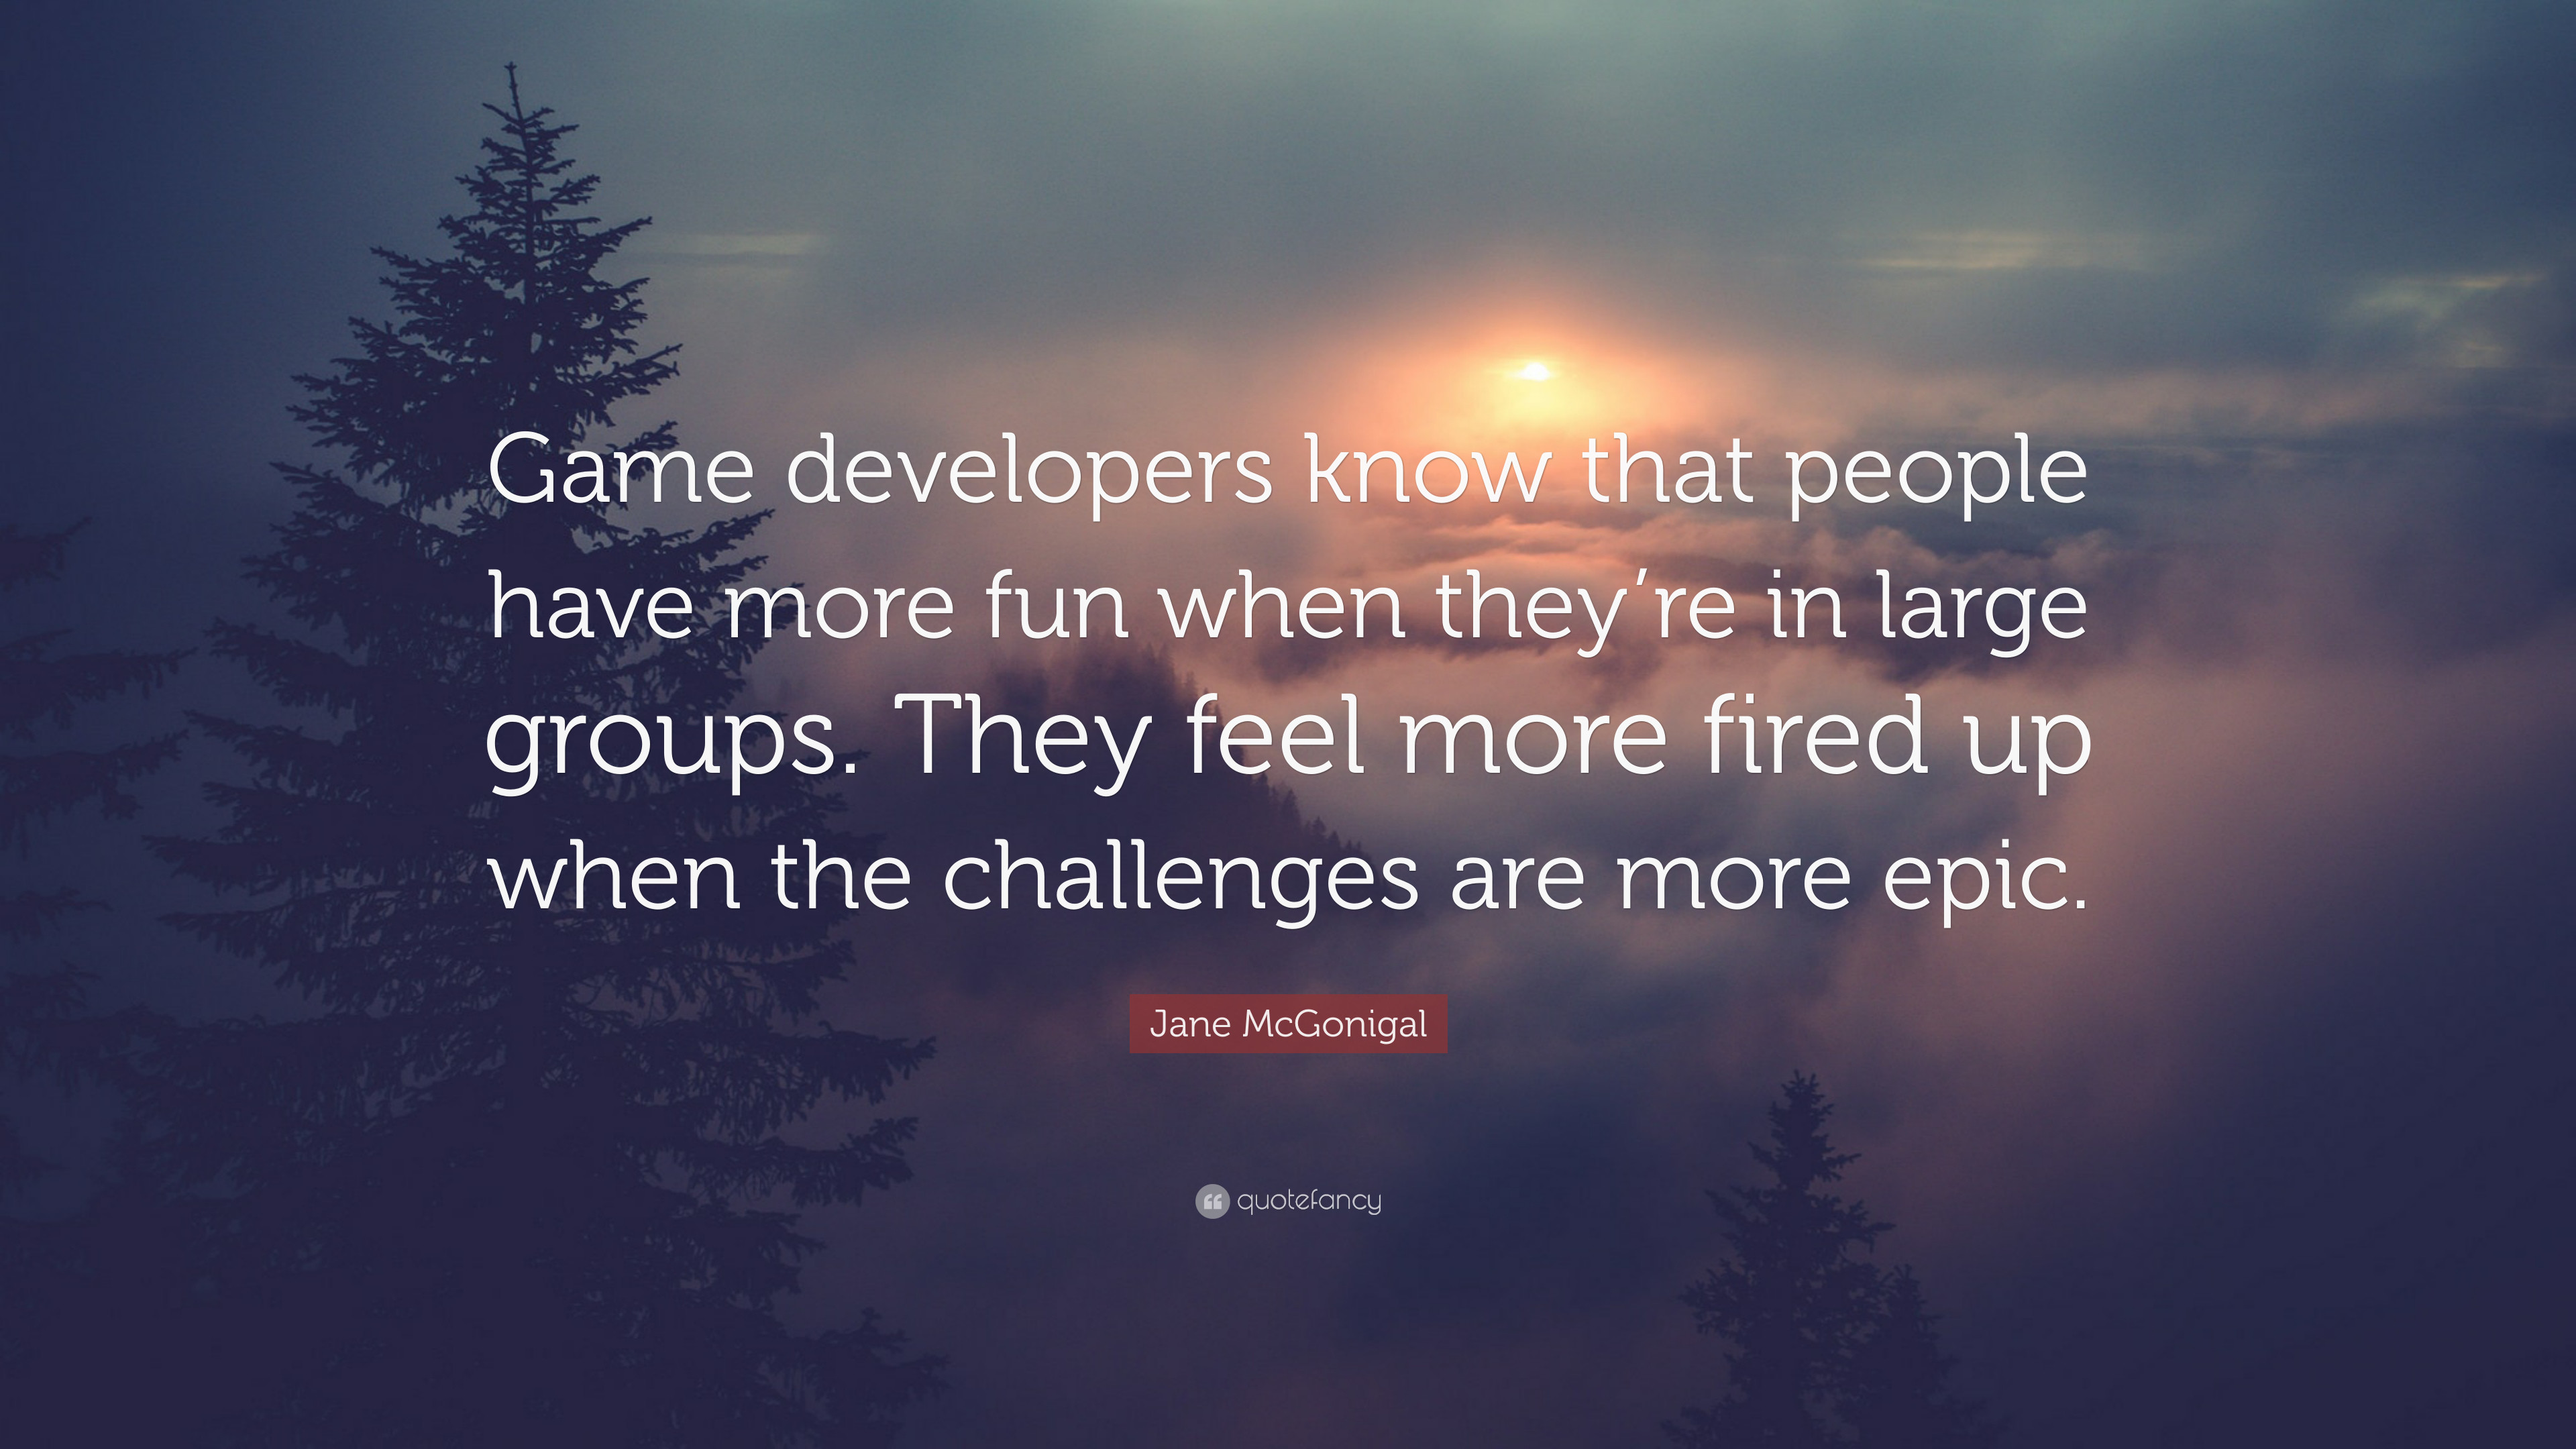 3840x2160 Jane McGonigal Quote: “Game developers know that people have more fun when  they'